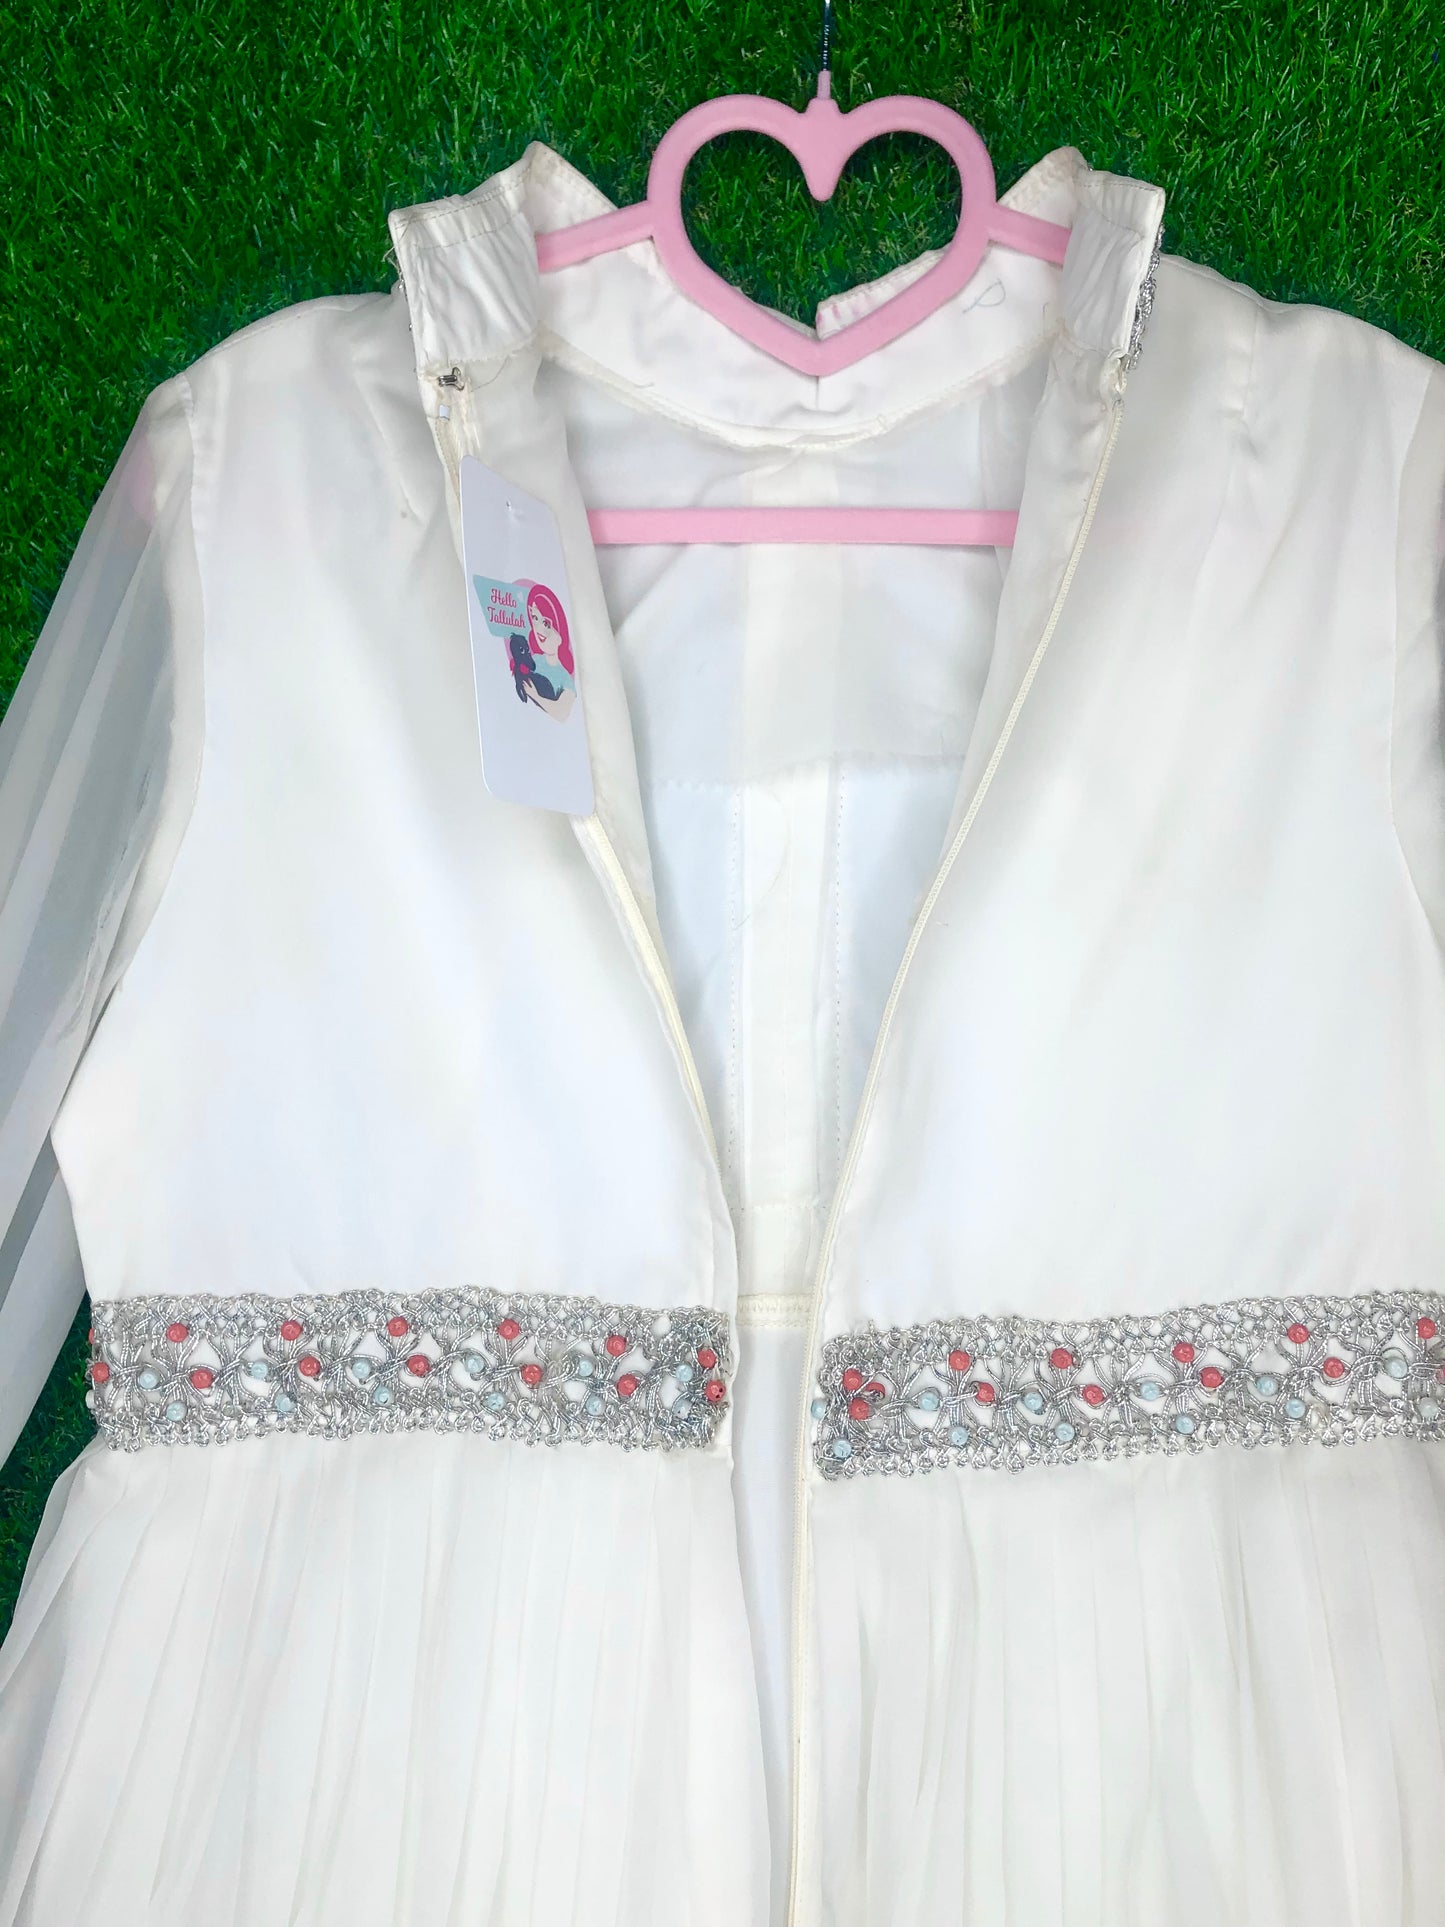 1970's Formal White Beaded Dress With Silver Accents